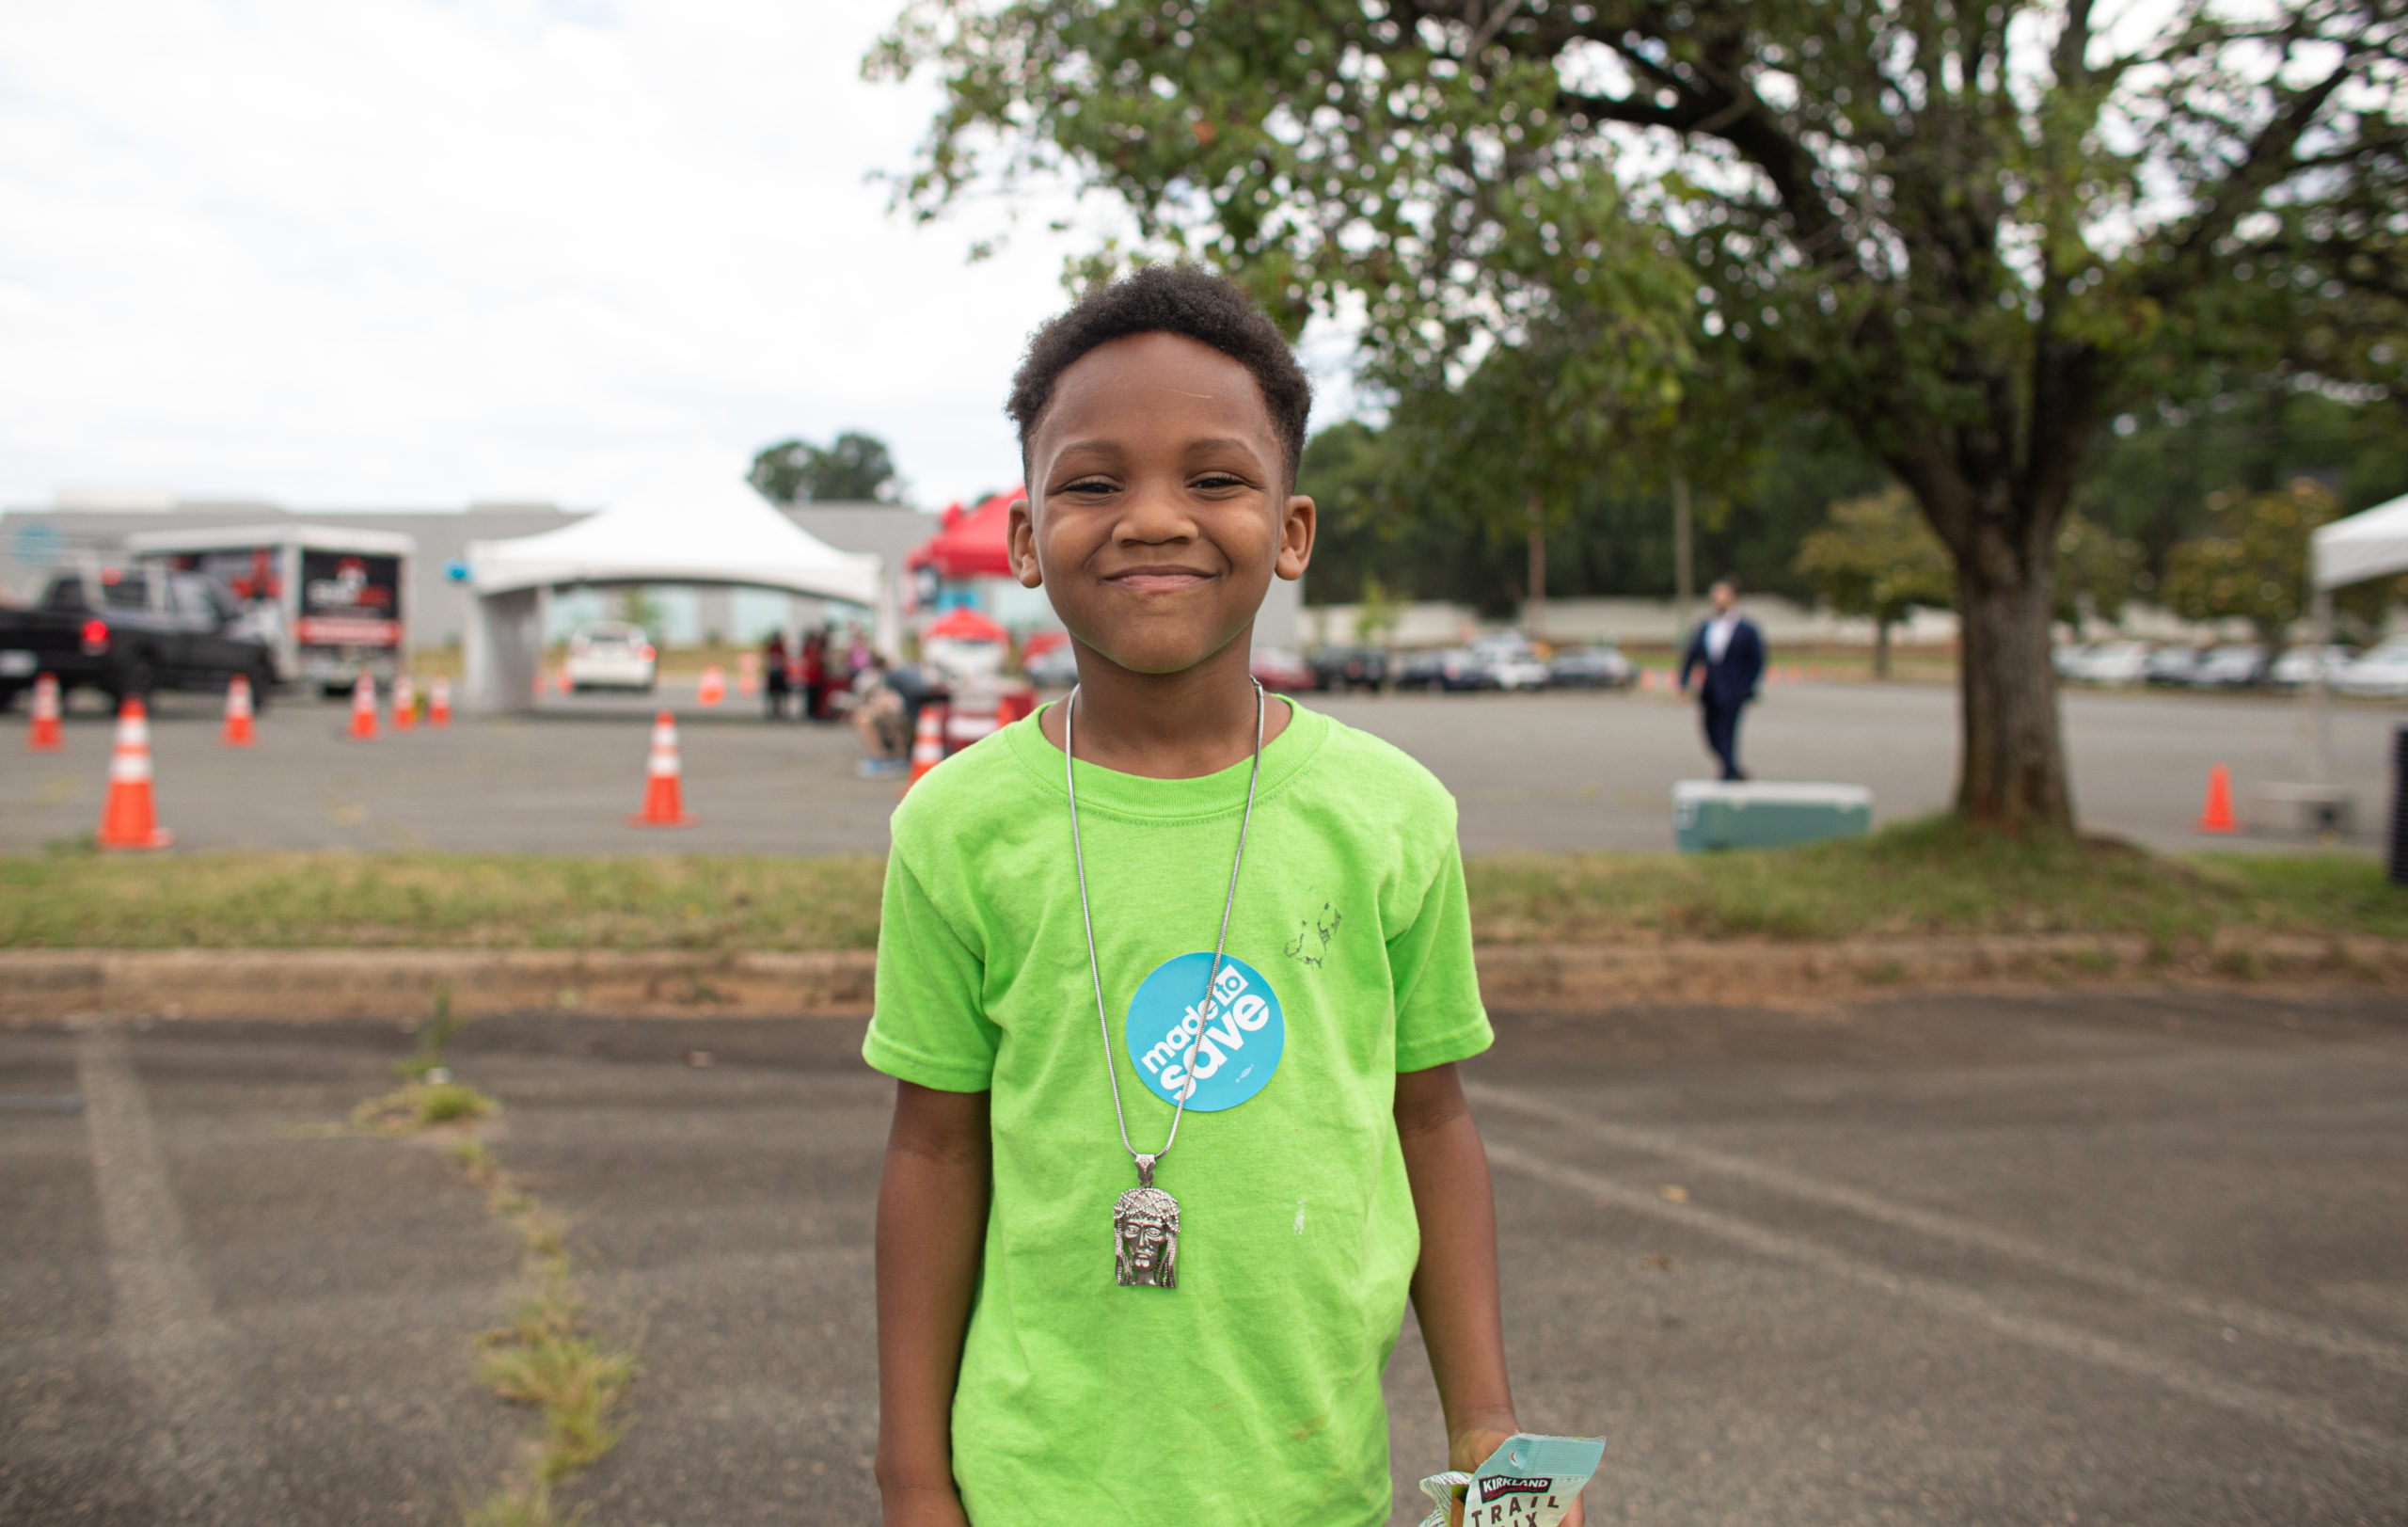 Image of boy wearing a green shirt and smiling